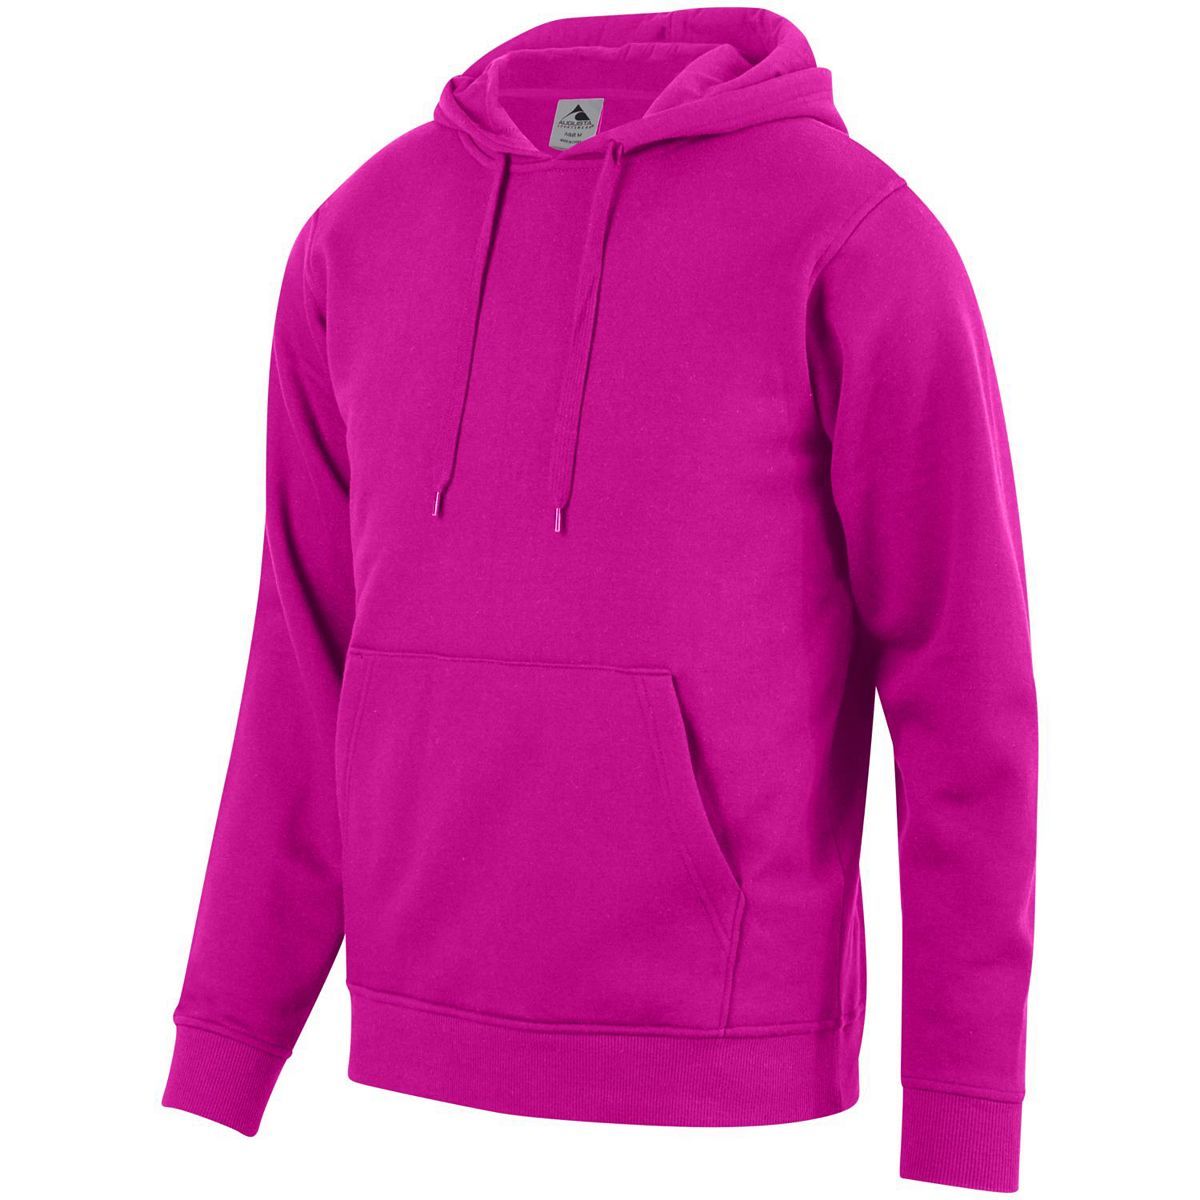 Augusta Sportswear Youth 60/40 Fleece Hoodie in Power Pink  -Part of the Youth, Youth-Hoodie, Hoodies, Augusta-Products product lines at KanaleyCreations.com